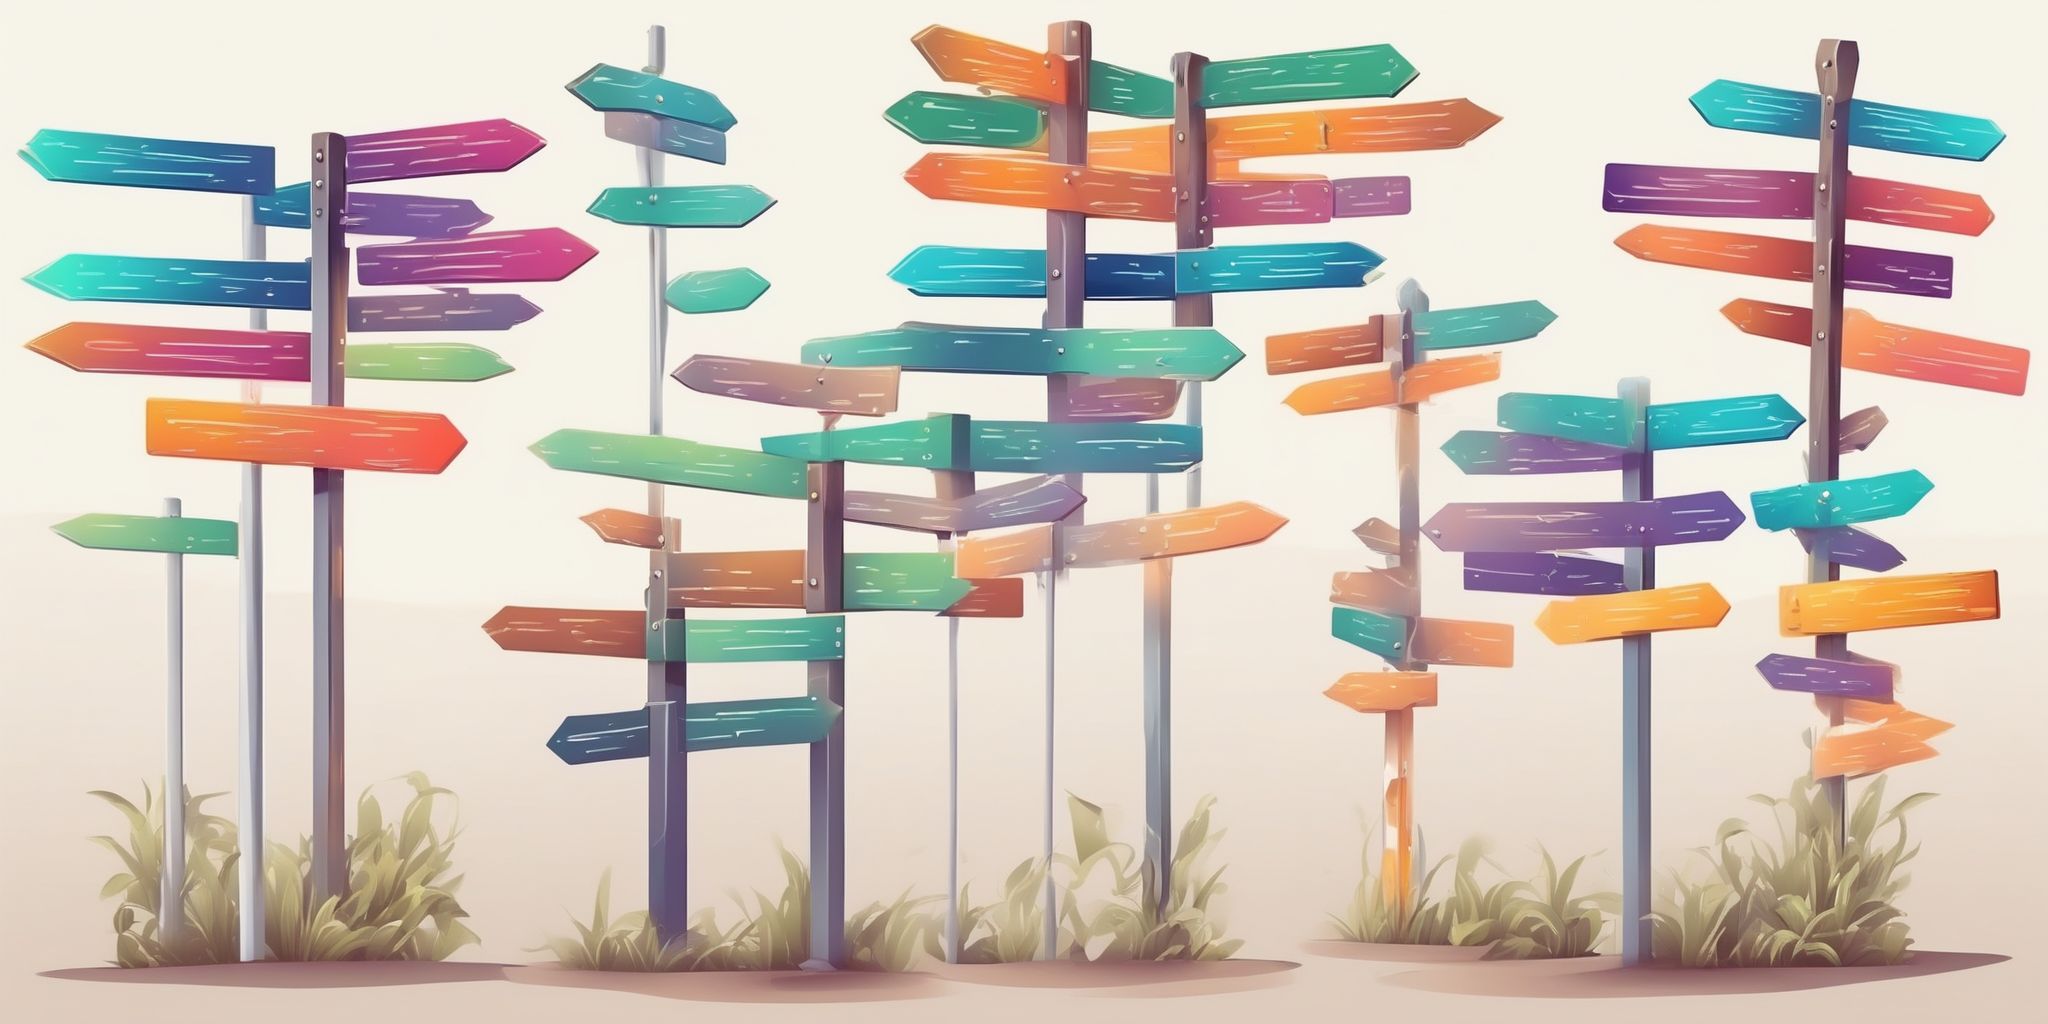 Signpost in illustration style with gradients and white background